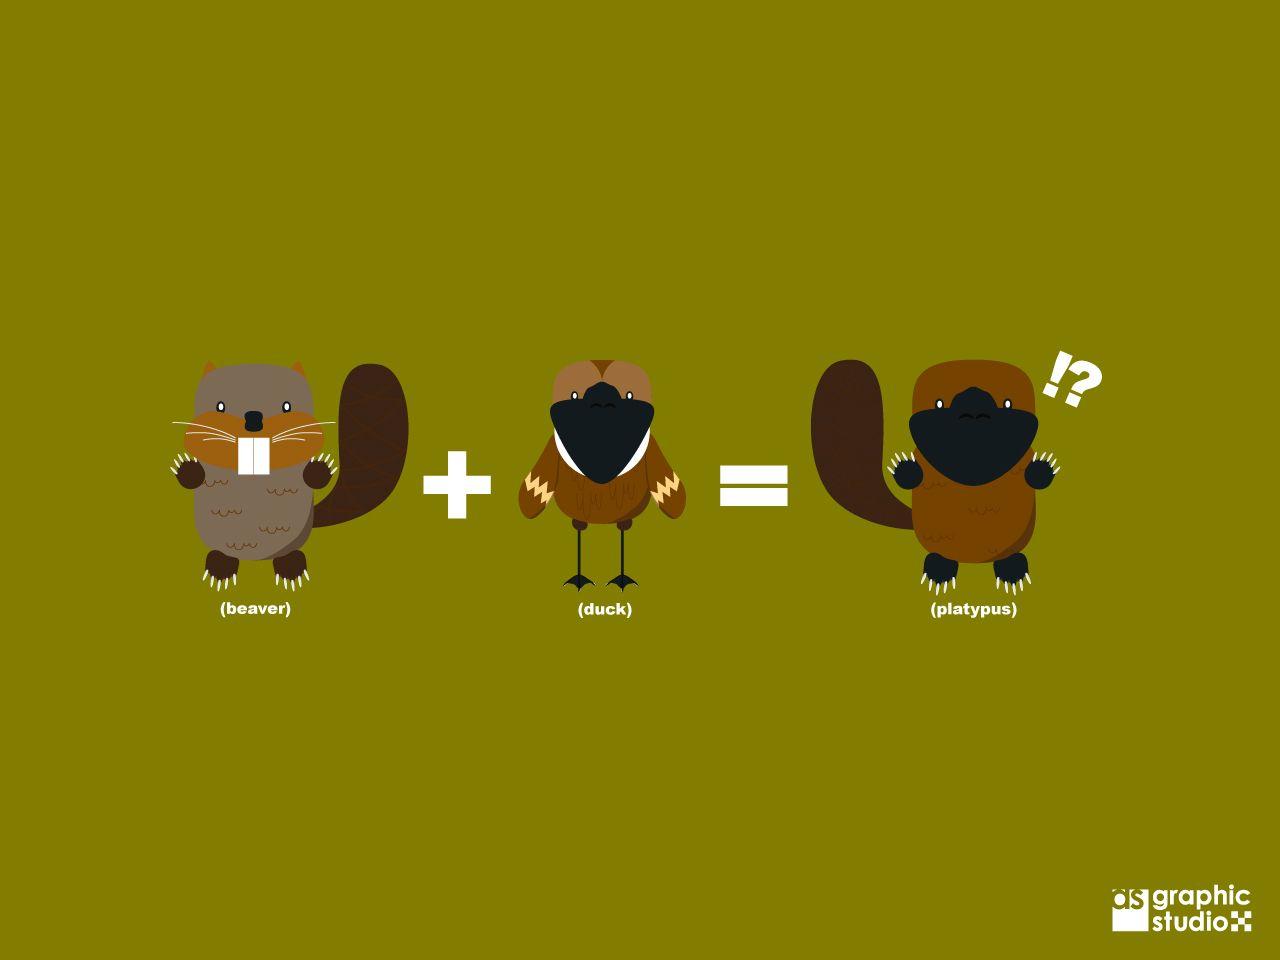 Platypus image Platypus Maths HD wallpaper and background